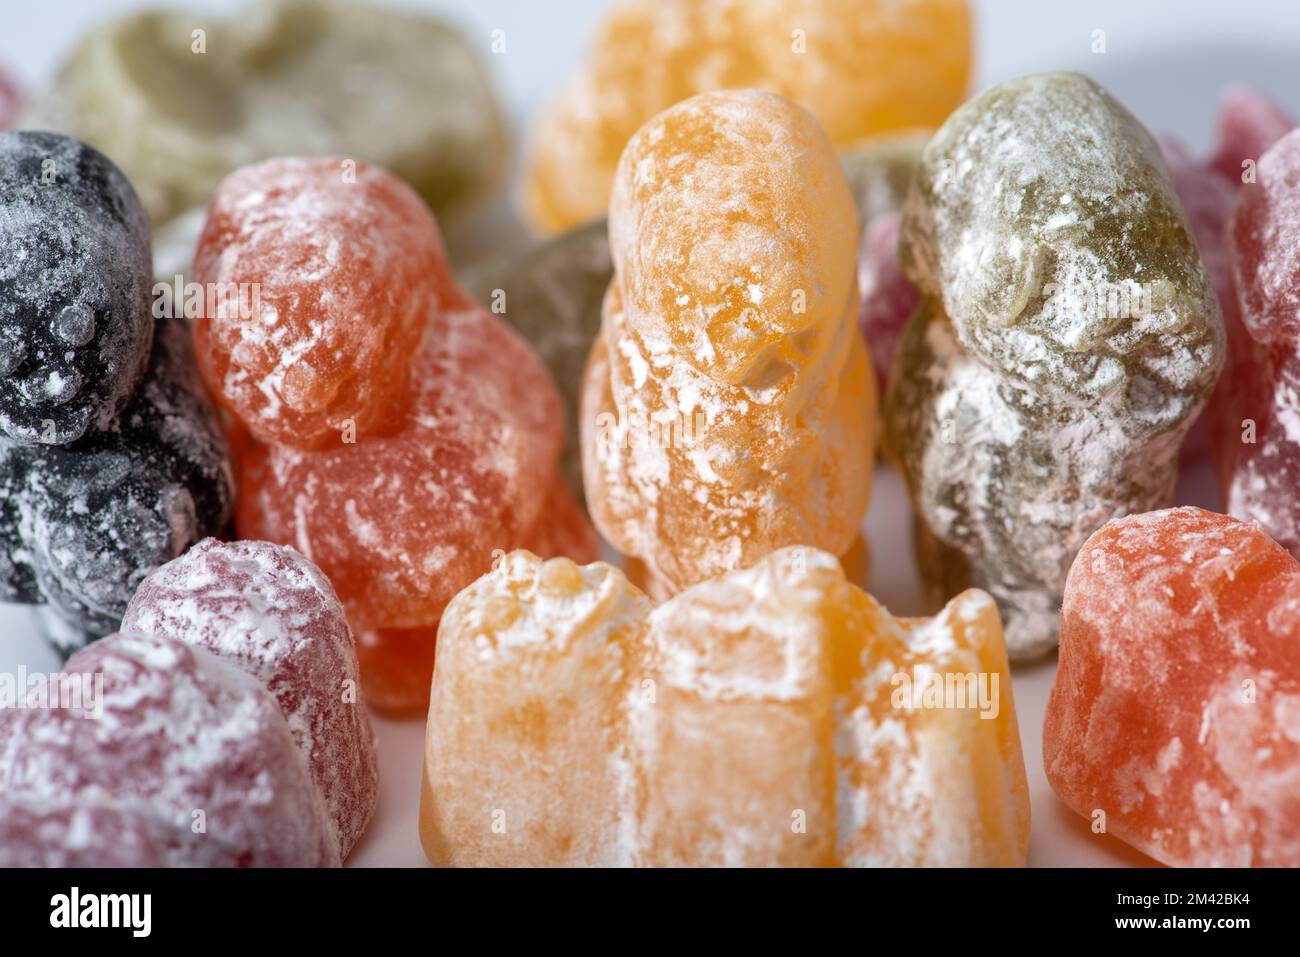 Jelly Babies Sweets Confectionary UK Stock Photo